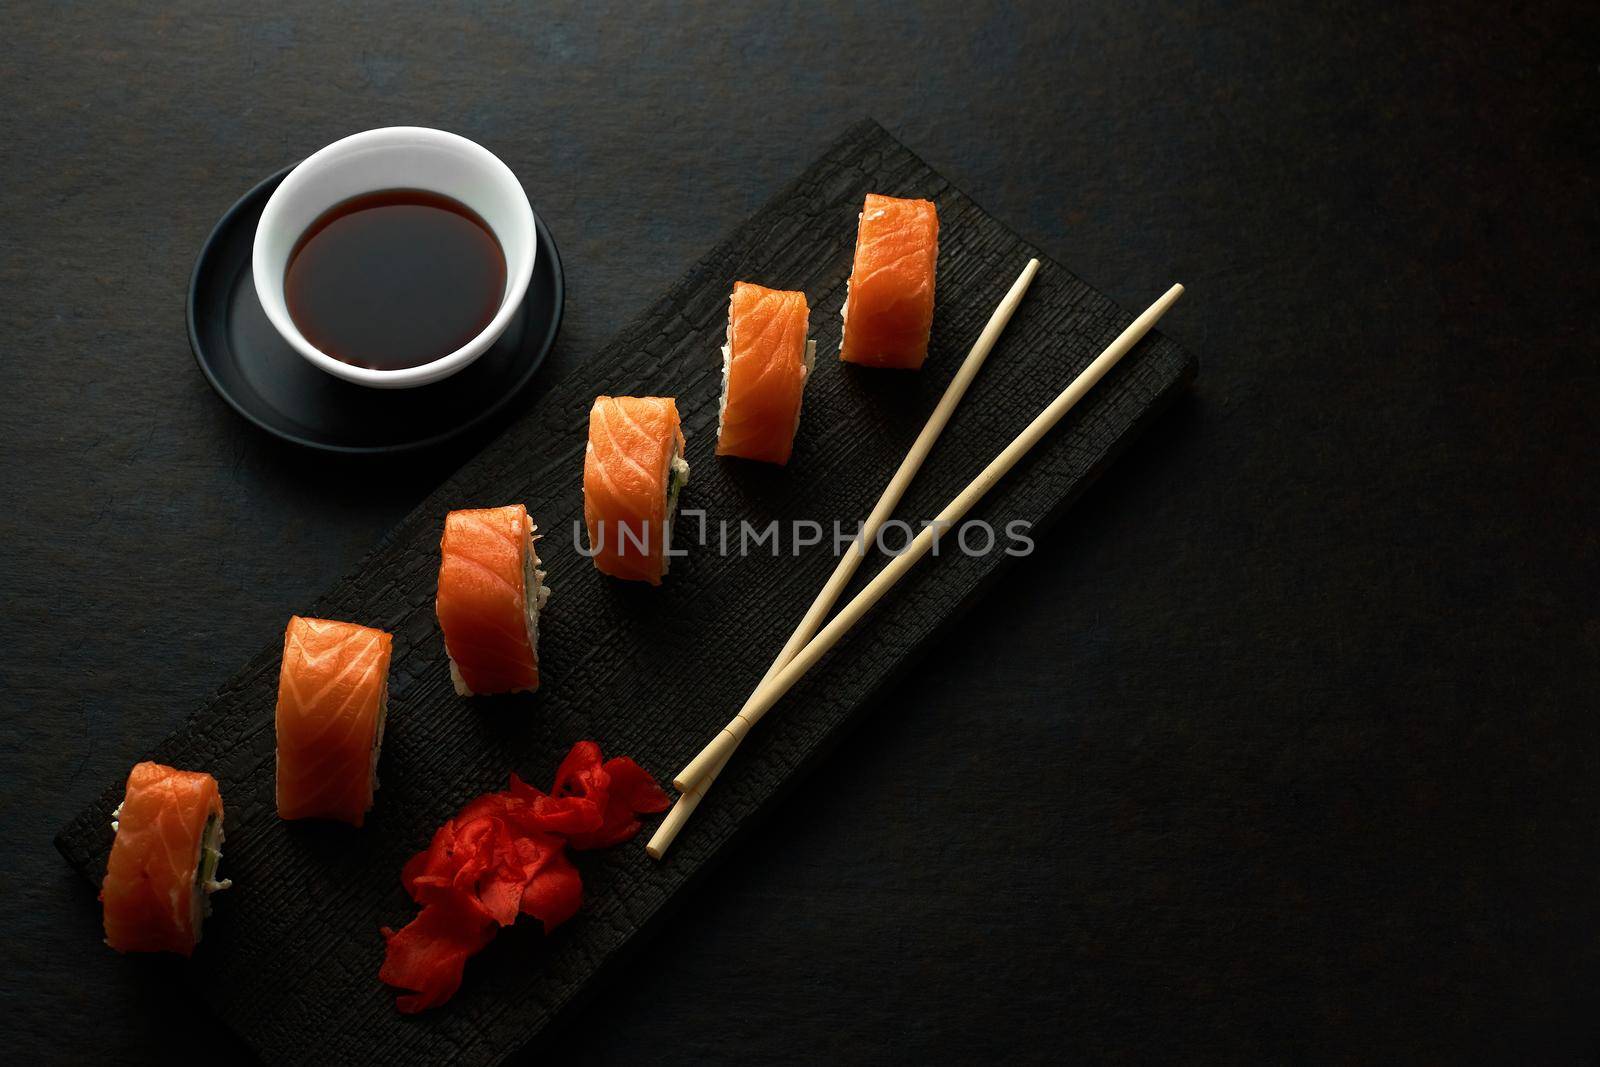 Sushi rolls. Dark style. Serving a meal at a Japanese restaurant. Top view with space to copy. Minimalism in marketing.